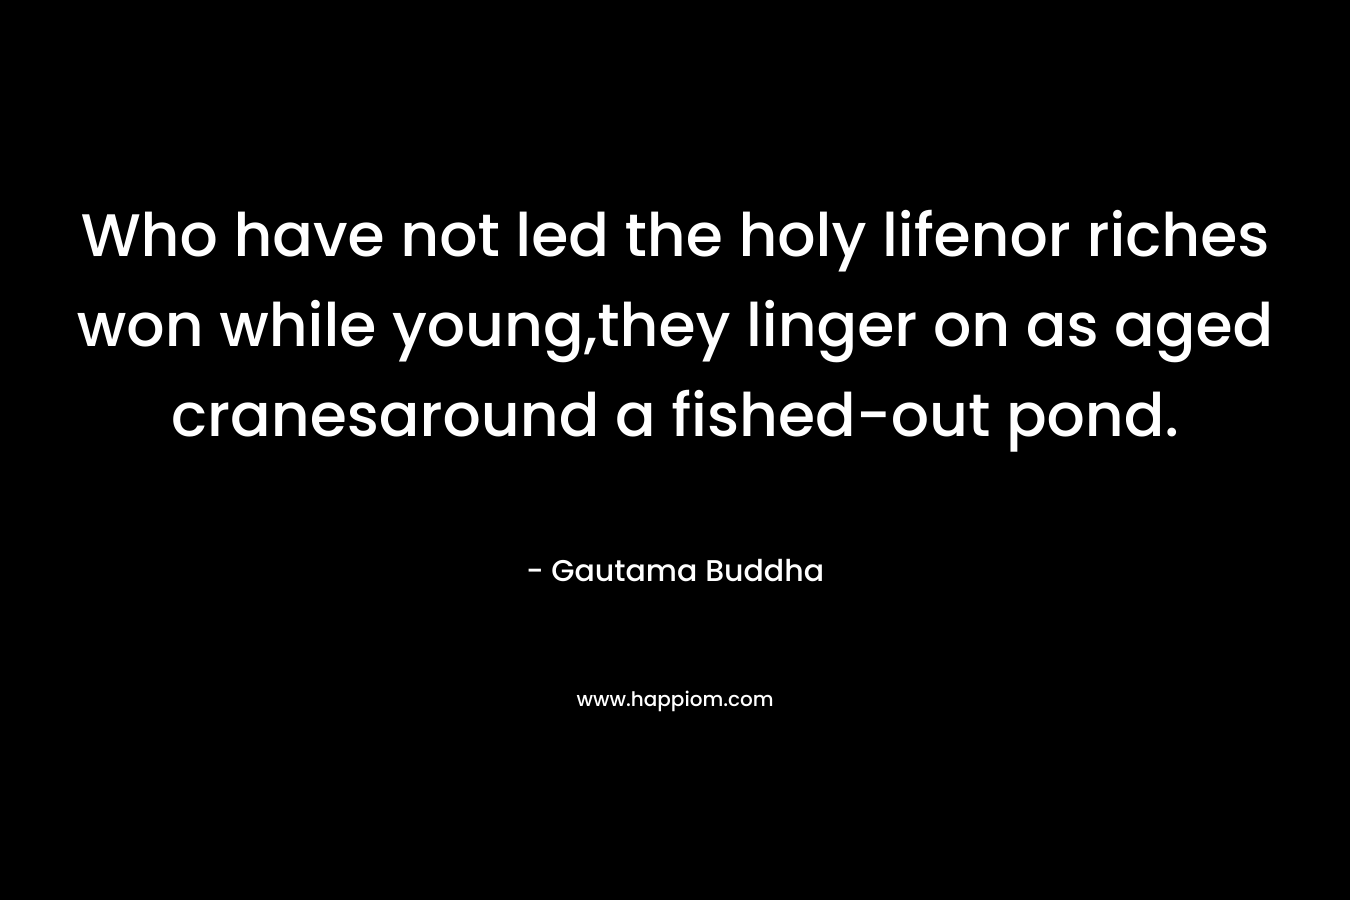 Who have not led the holy lifenor riches won while young,they linger on as aged cranesaround a fished-out pond. – Gautama Buddha